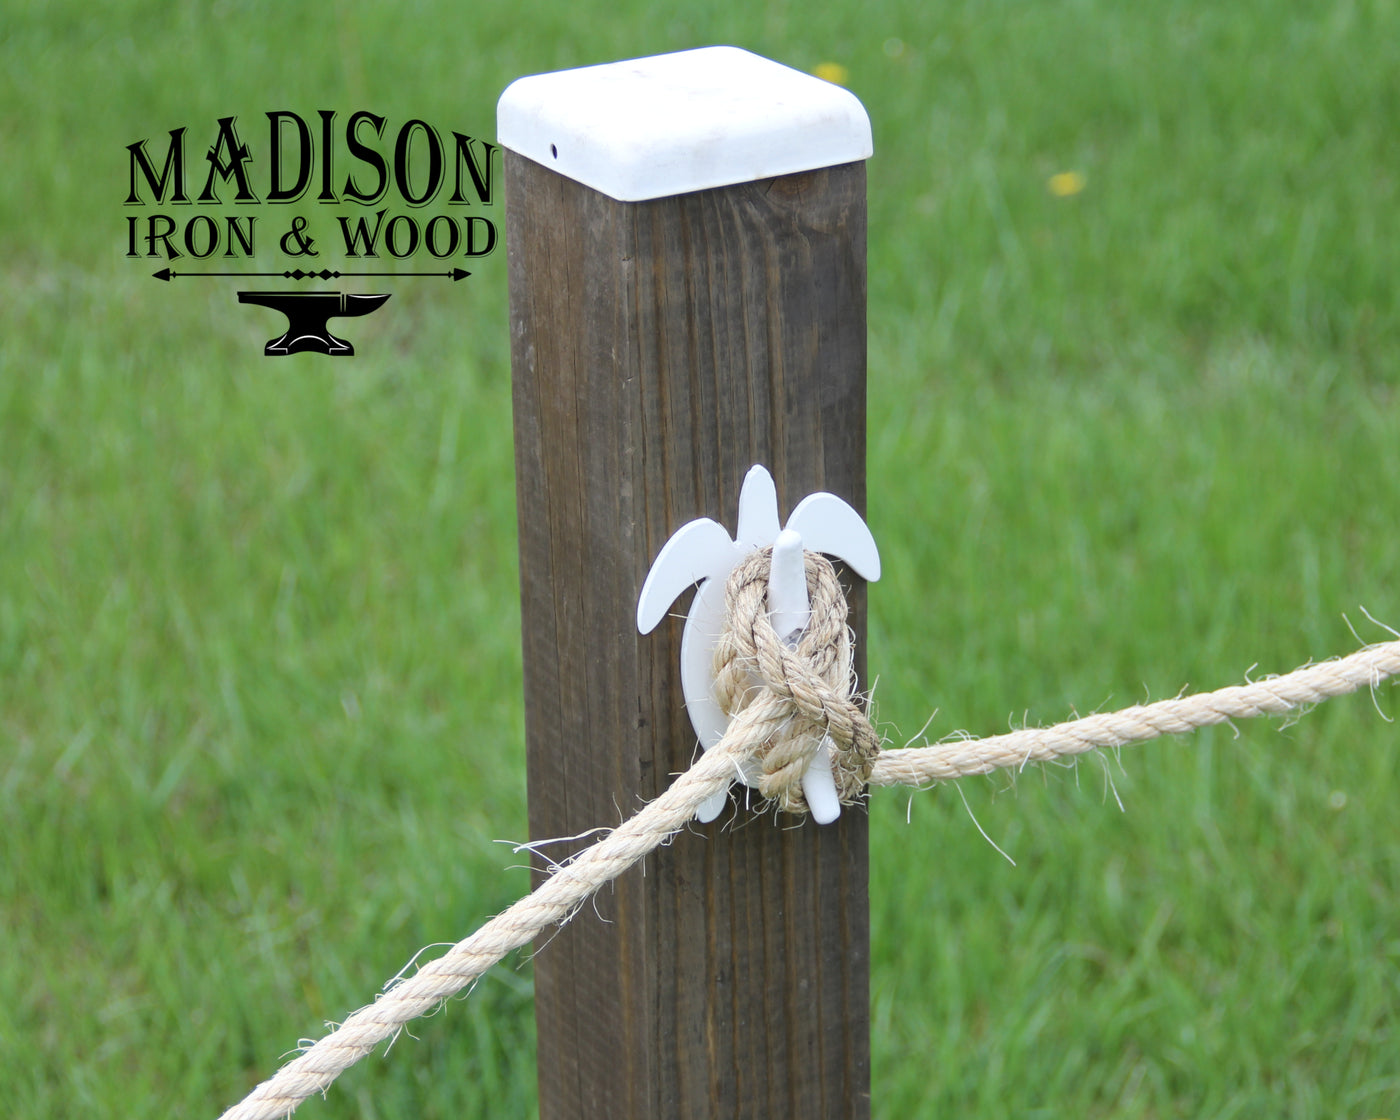 Turtle Nautical Rope Fence Bracket, Boat Tie-off Design - Madison Iron and Wood - Post Cap - metal outdoor decor - Steel deocrations - american made products - veteran owned business products - fencing decorations - fencing supplies - custom wall decorations - personalized wall signs - steel - decorative post caps - steel post caps - metal post caps - brackets - structural brackets - home improvement - easter - easter decorations - easter gift - easter yard decor